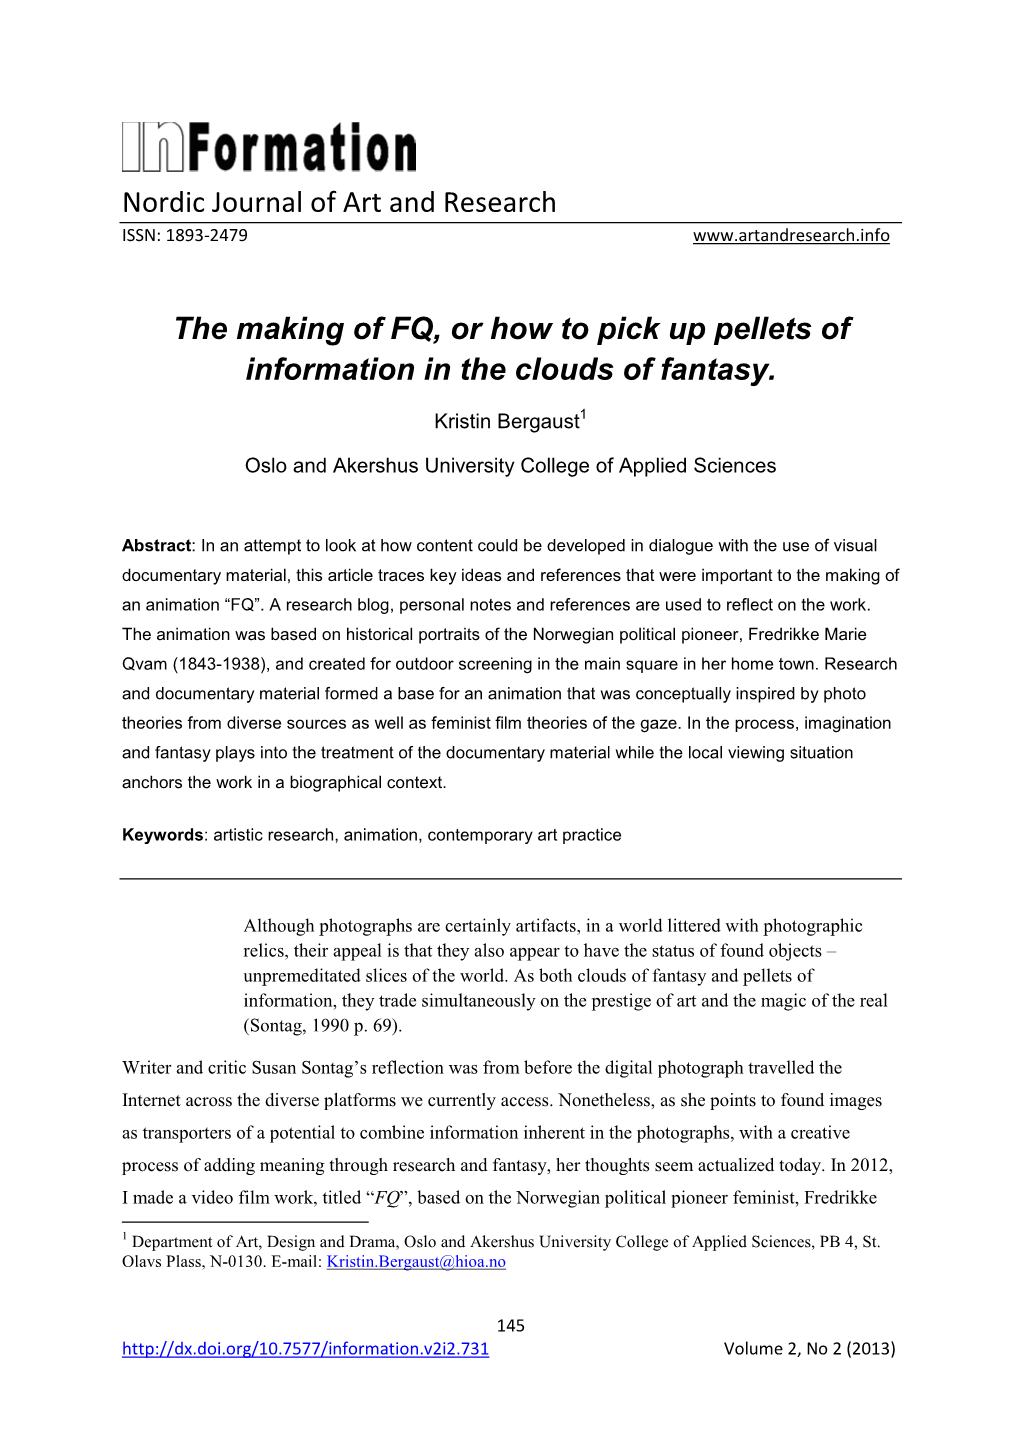 The Making of FQ, Or How to Pick up Pellets of Information in the Clouds of Fantasy